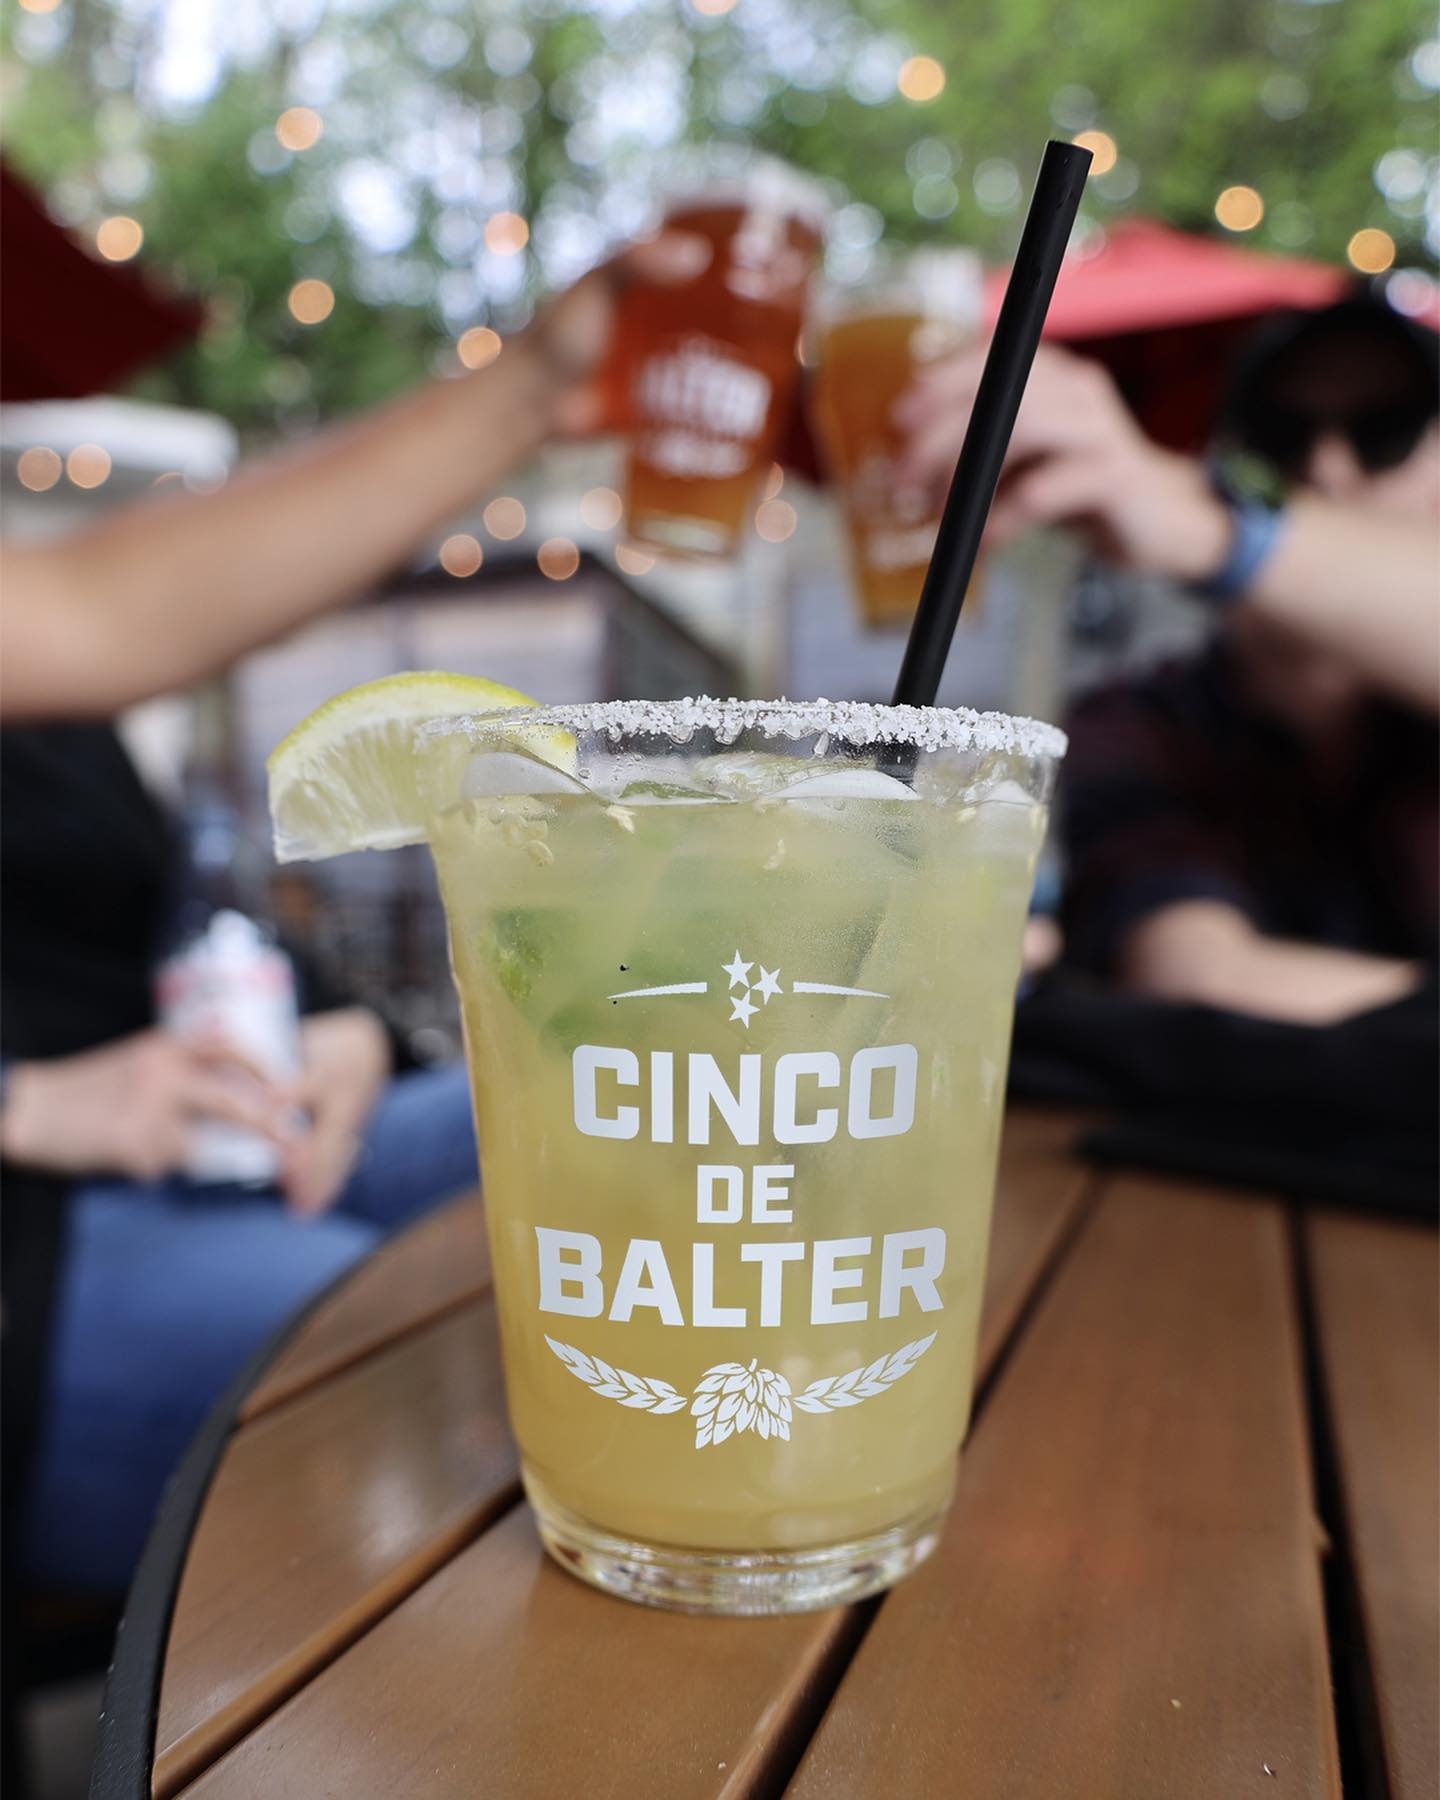 Are you ready for Cinco De Balter?!🍺 We will be serving up festive specials all weekend long on May 3rd, 4th, and 5th. Enjoy specially priced cerveza, margs, and munchies. &iexcl;Viva la Balter! 🌮

May 3rd: 3 PM to close
May 4th and 5th: 4 PM to cl